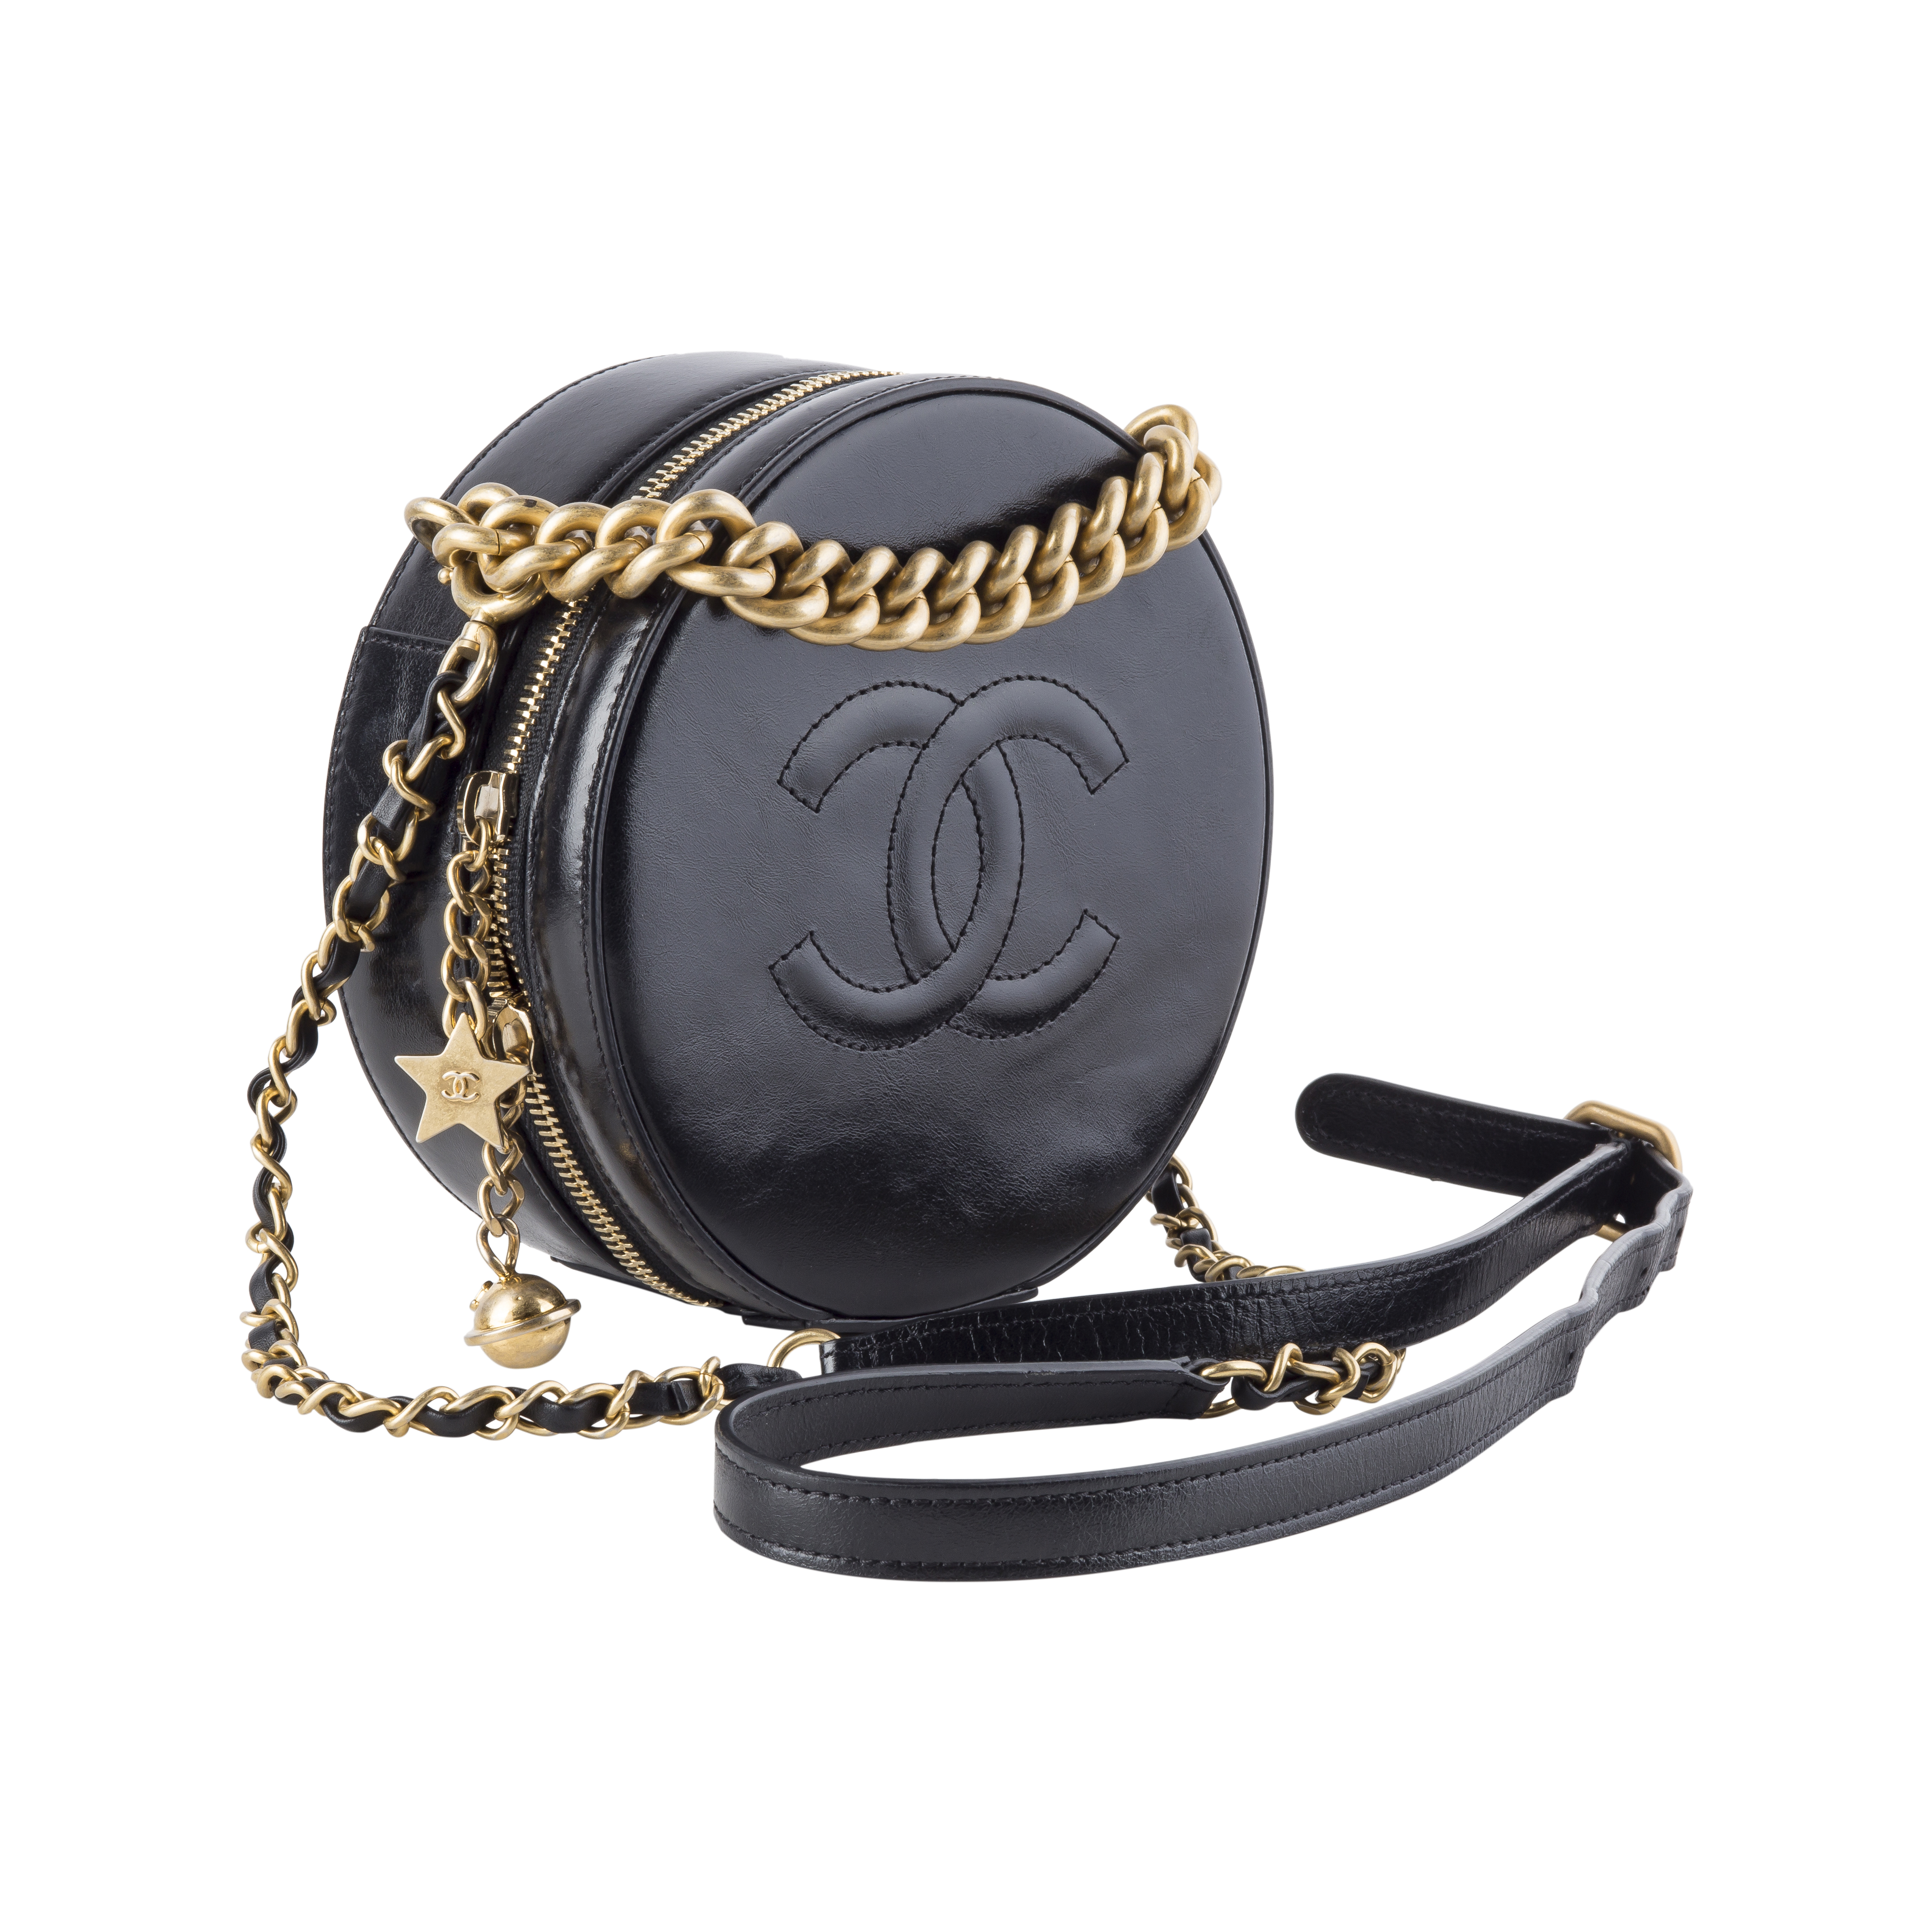 2019 Chanel Black Quilted Patent Leather Round as Earth Bag at 1stDibs  chanel  round as earth bag round as earth chanel bag bag of parody jelly bag price